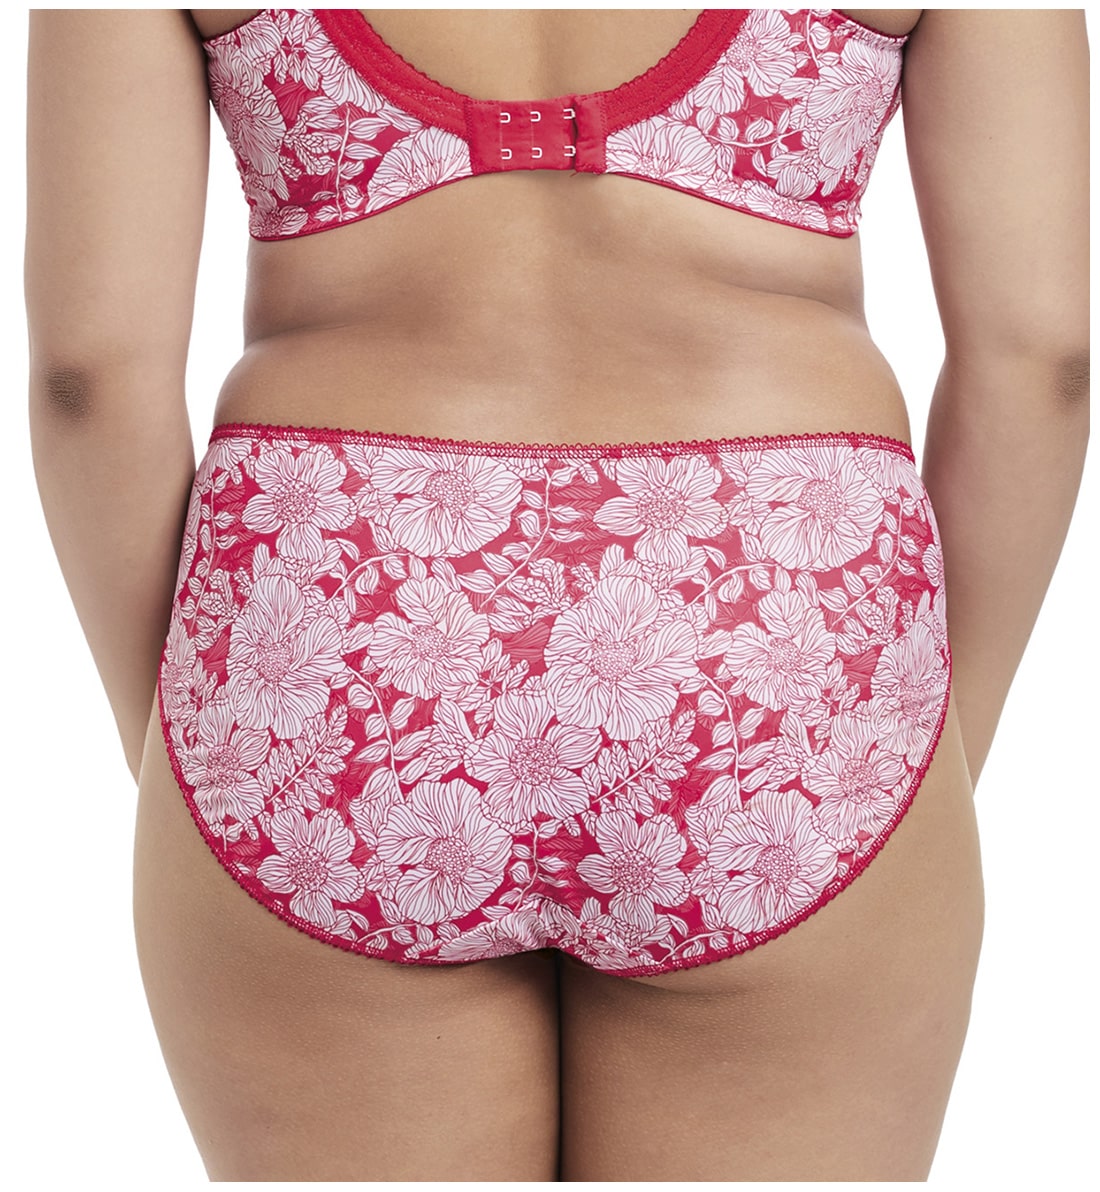 Elomi Kim Matching Panty Brief (4345),Large,Fiery Floral - Fiery Floral,Large